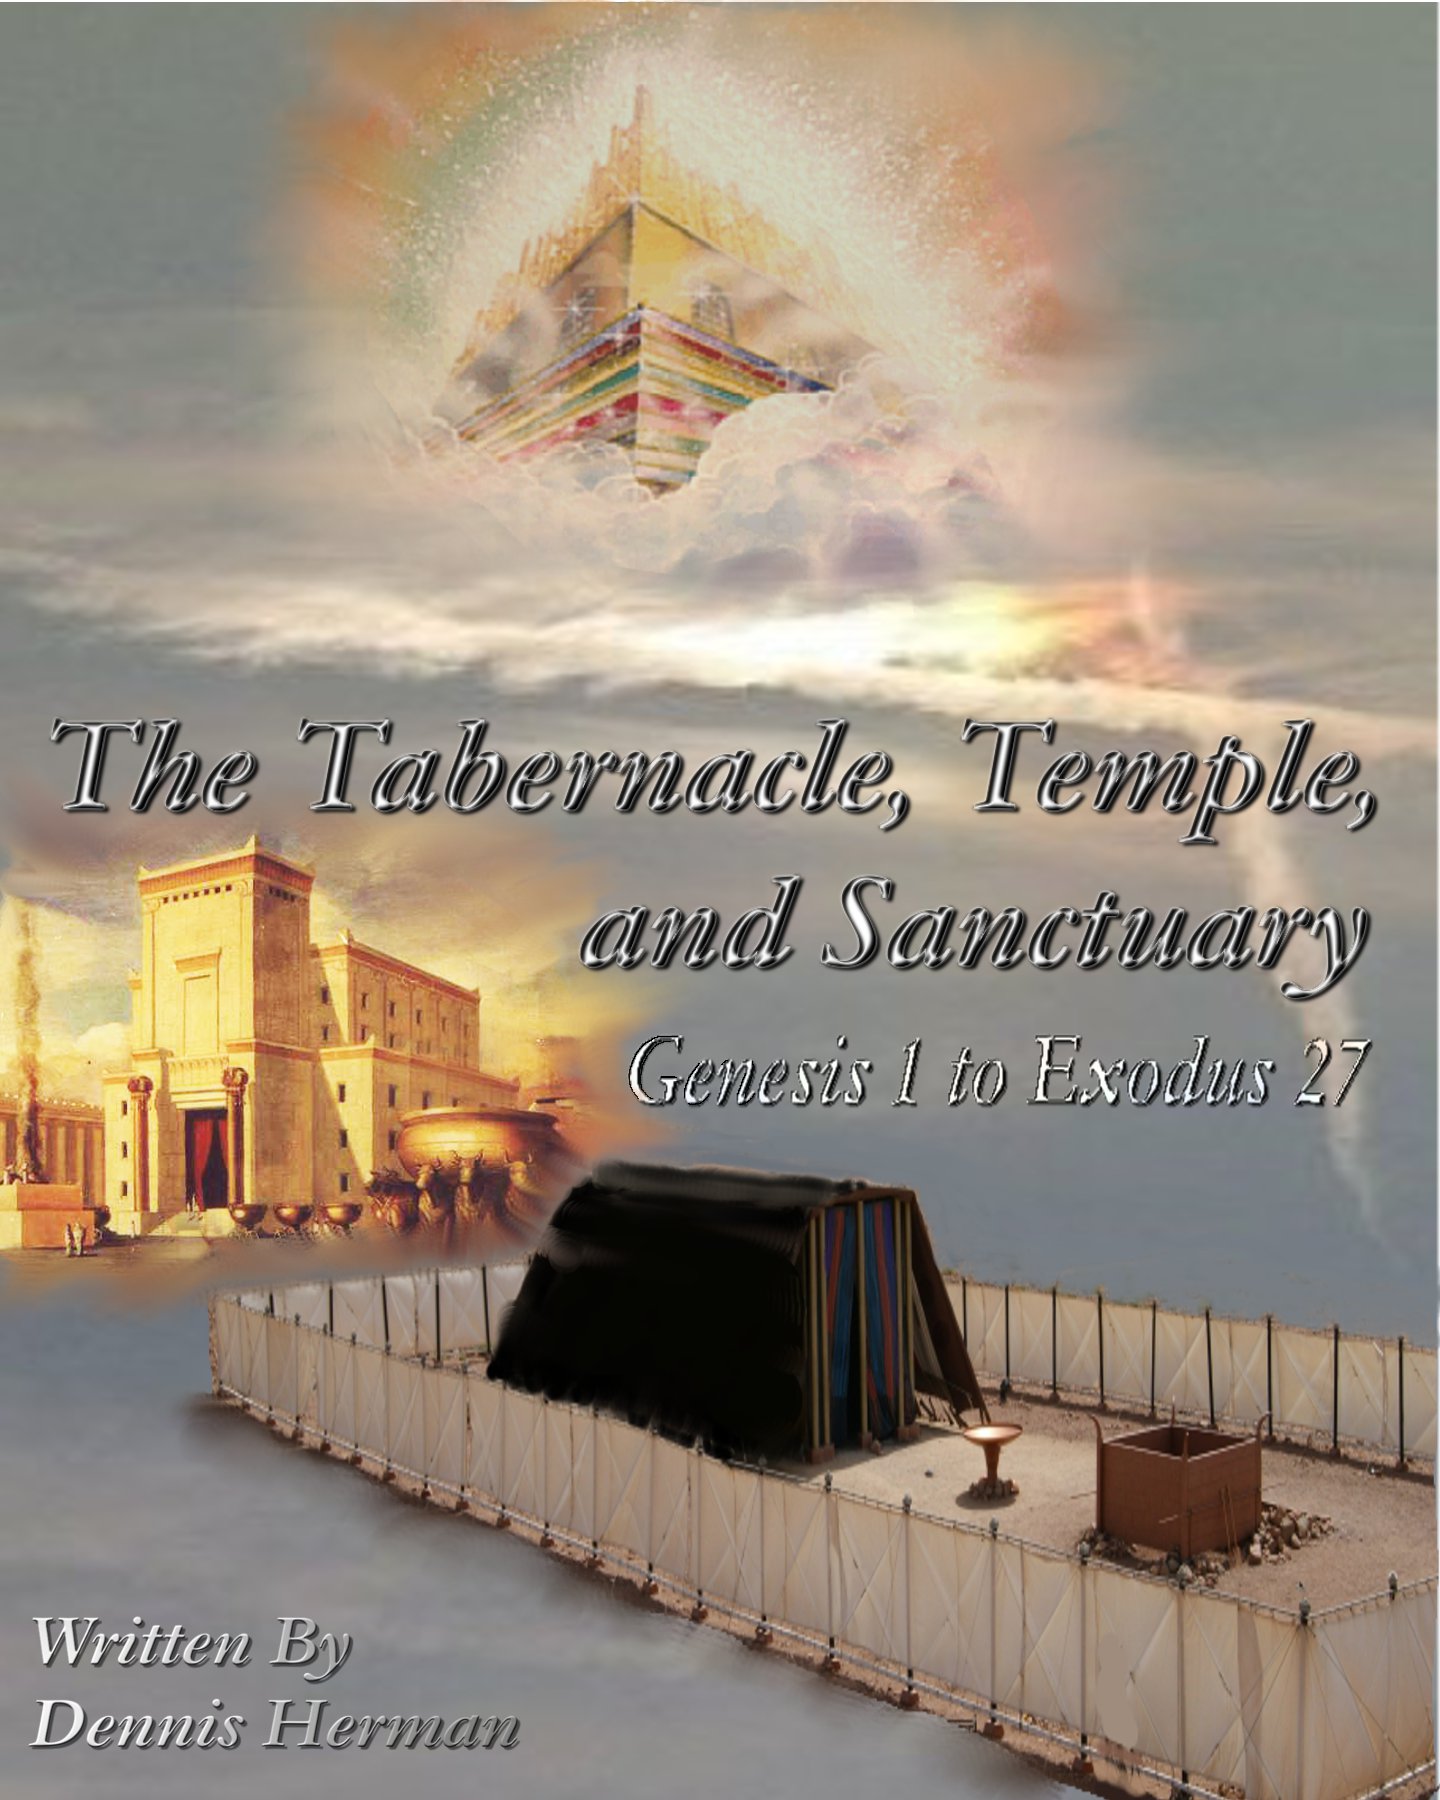 In depth study on the Tabernacle from Genesis 1 to Exodus 27